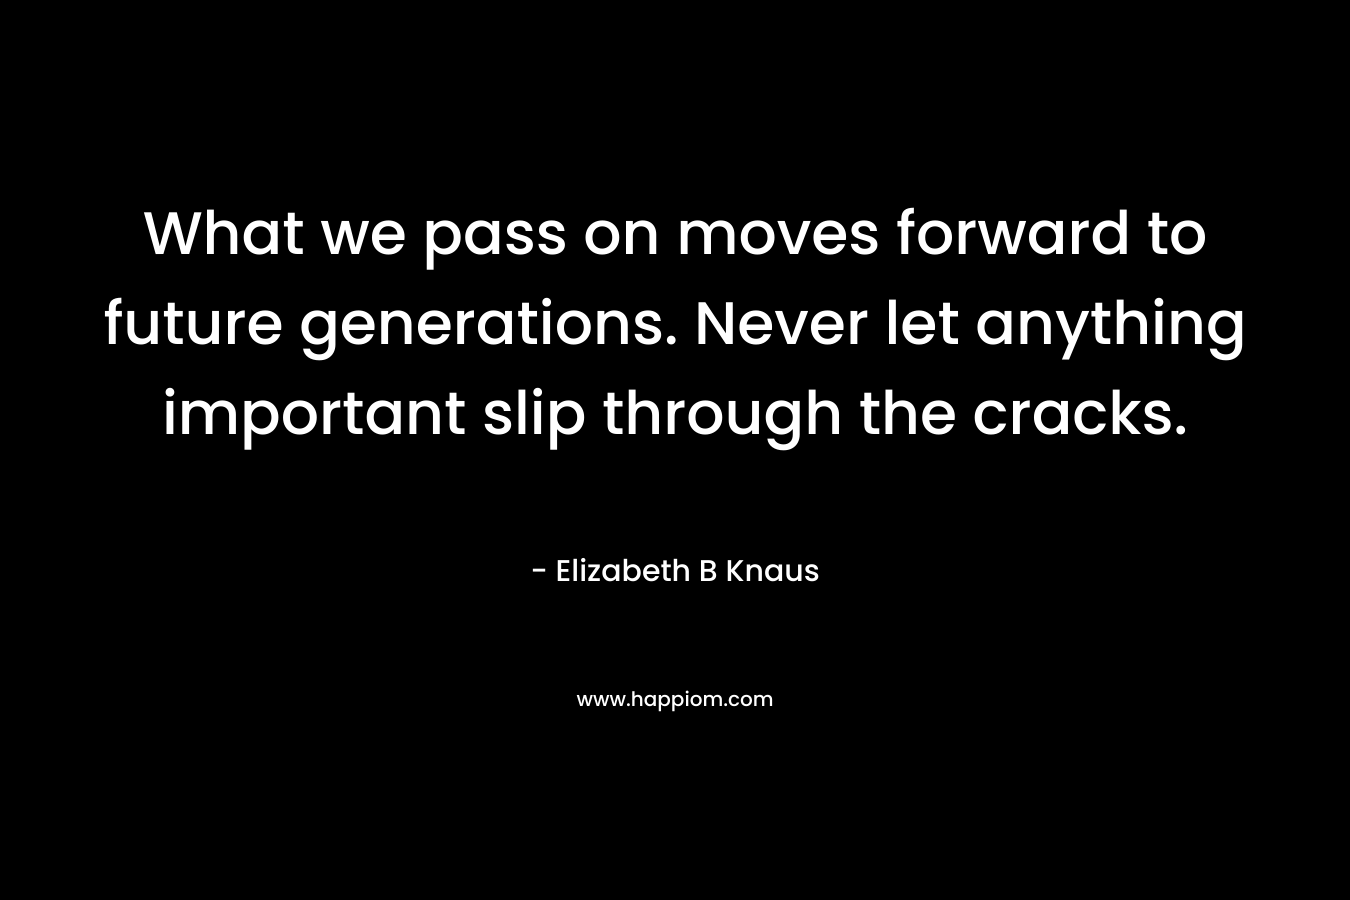 What we pass on moves forward to future generations. Never let anything important slip through the cracks.